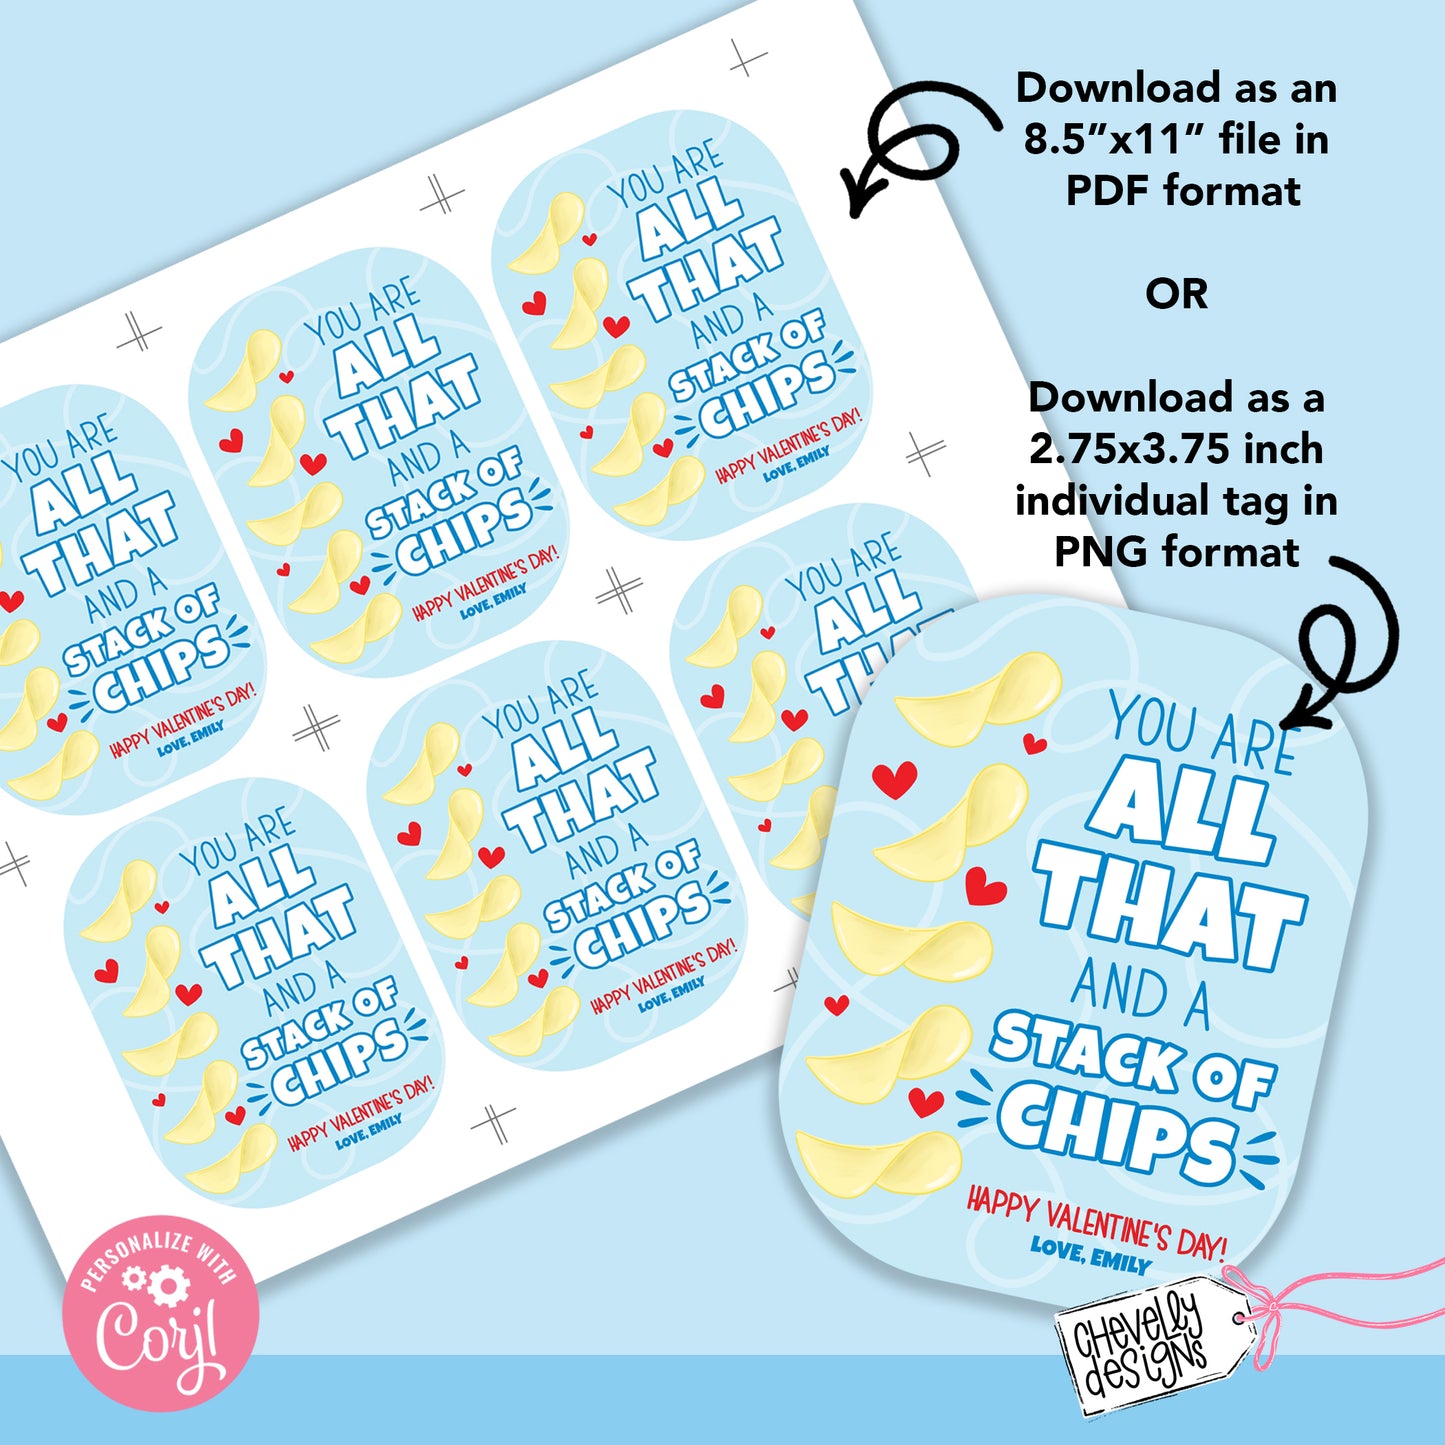 EDITABLE - You are all that and a stack of chips - Student Valentine Cards - Printable Digital File